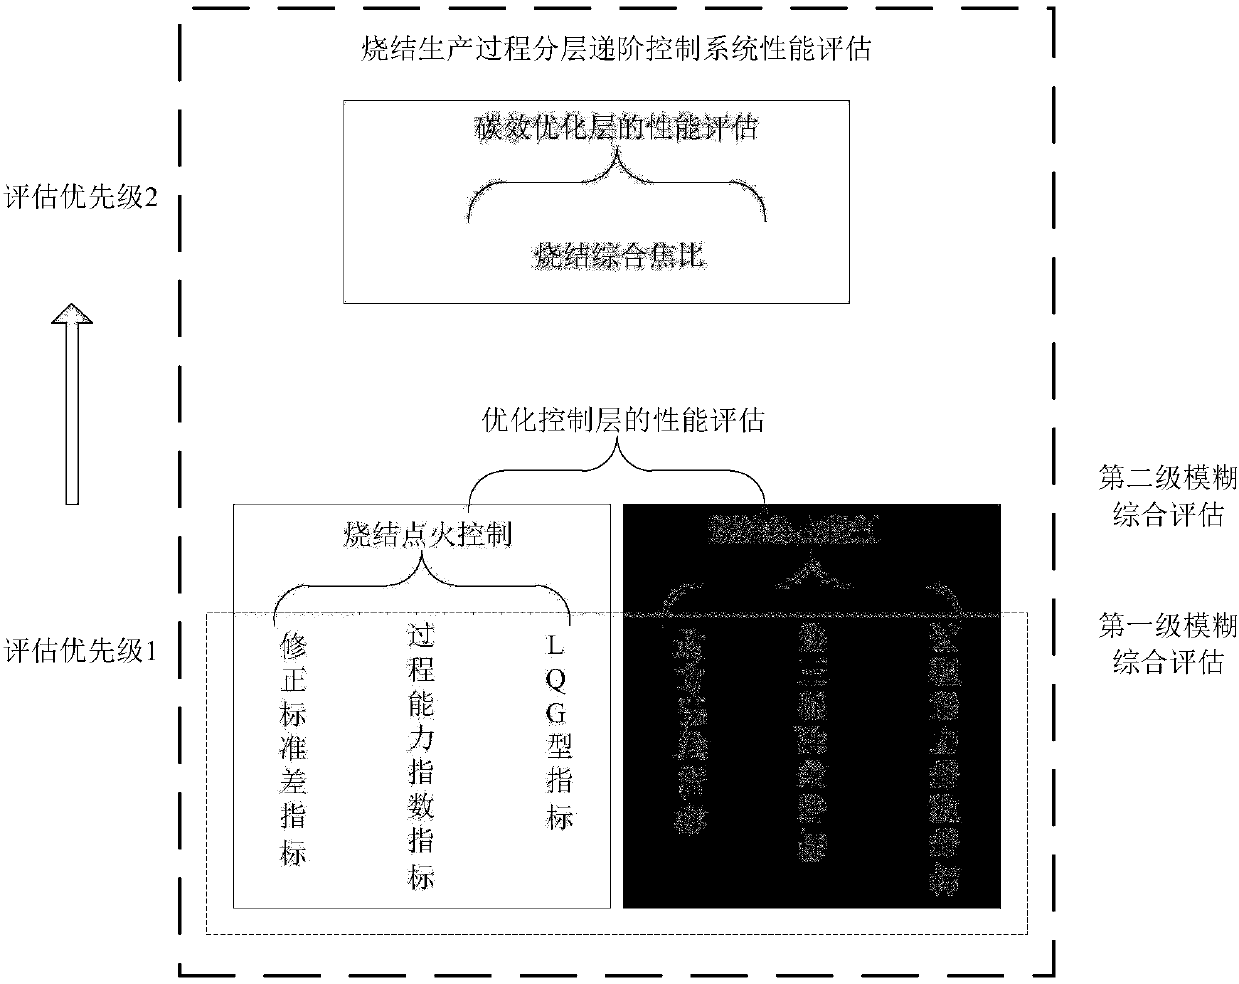 Performance evaluation method for sintering production process on basis of fuzzy synthesis